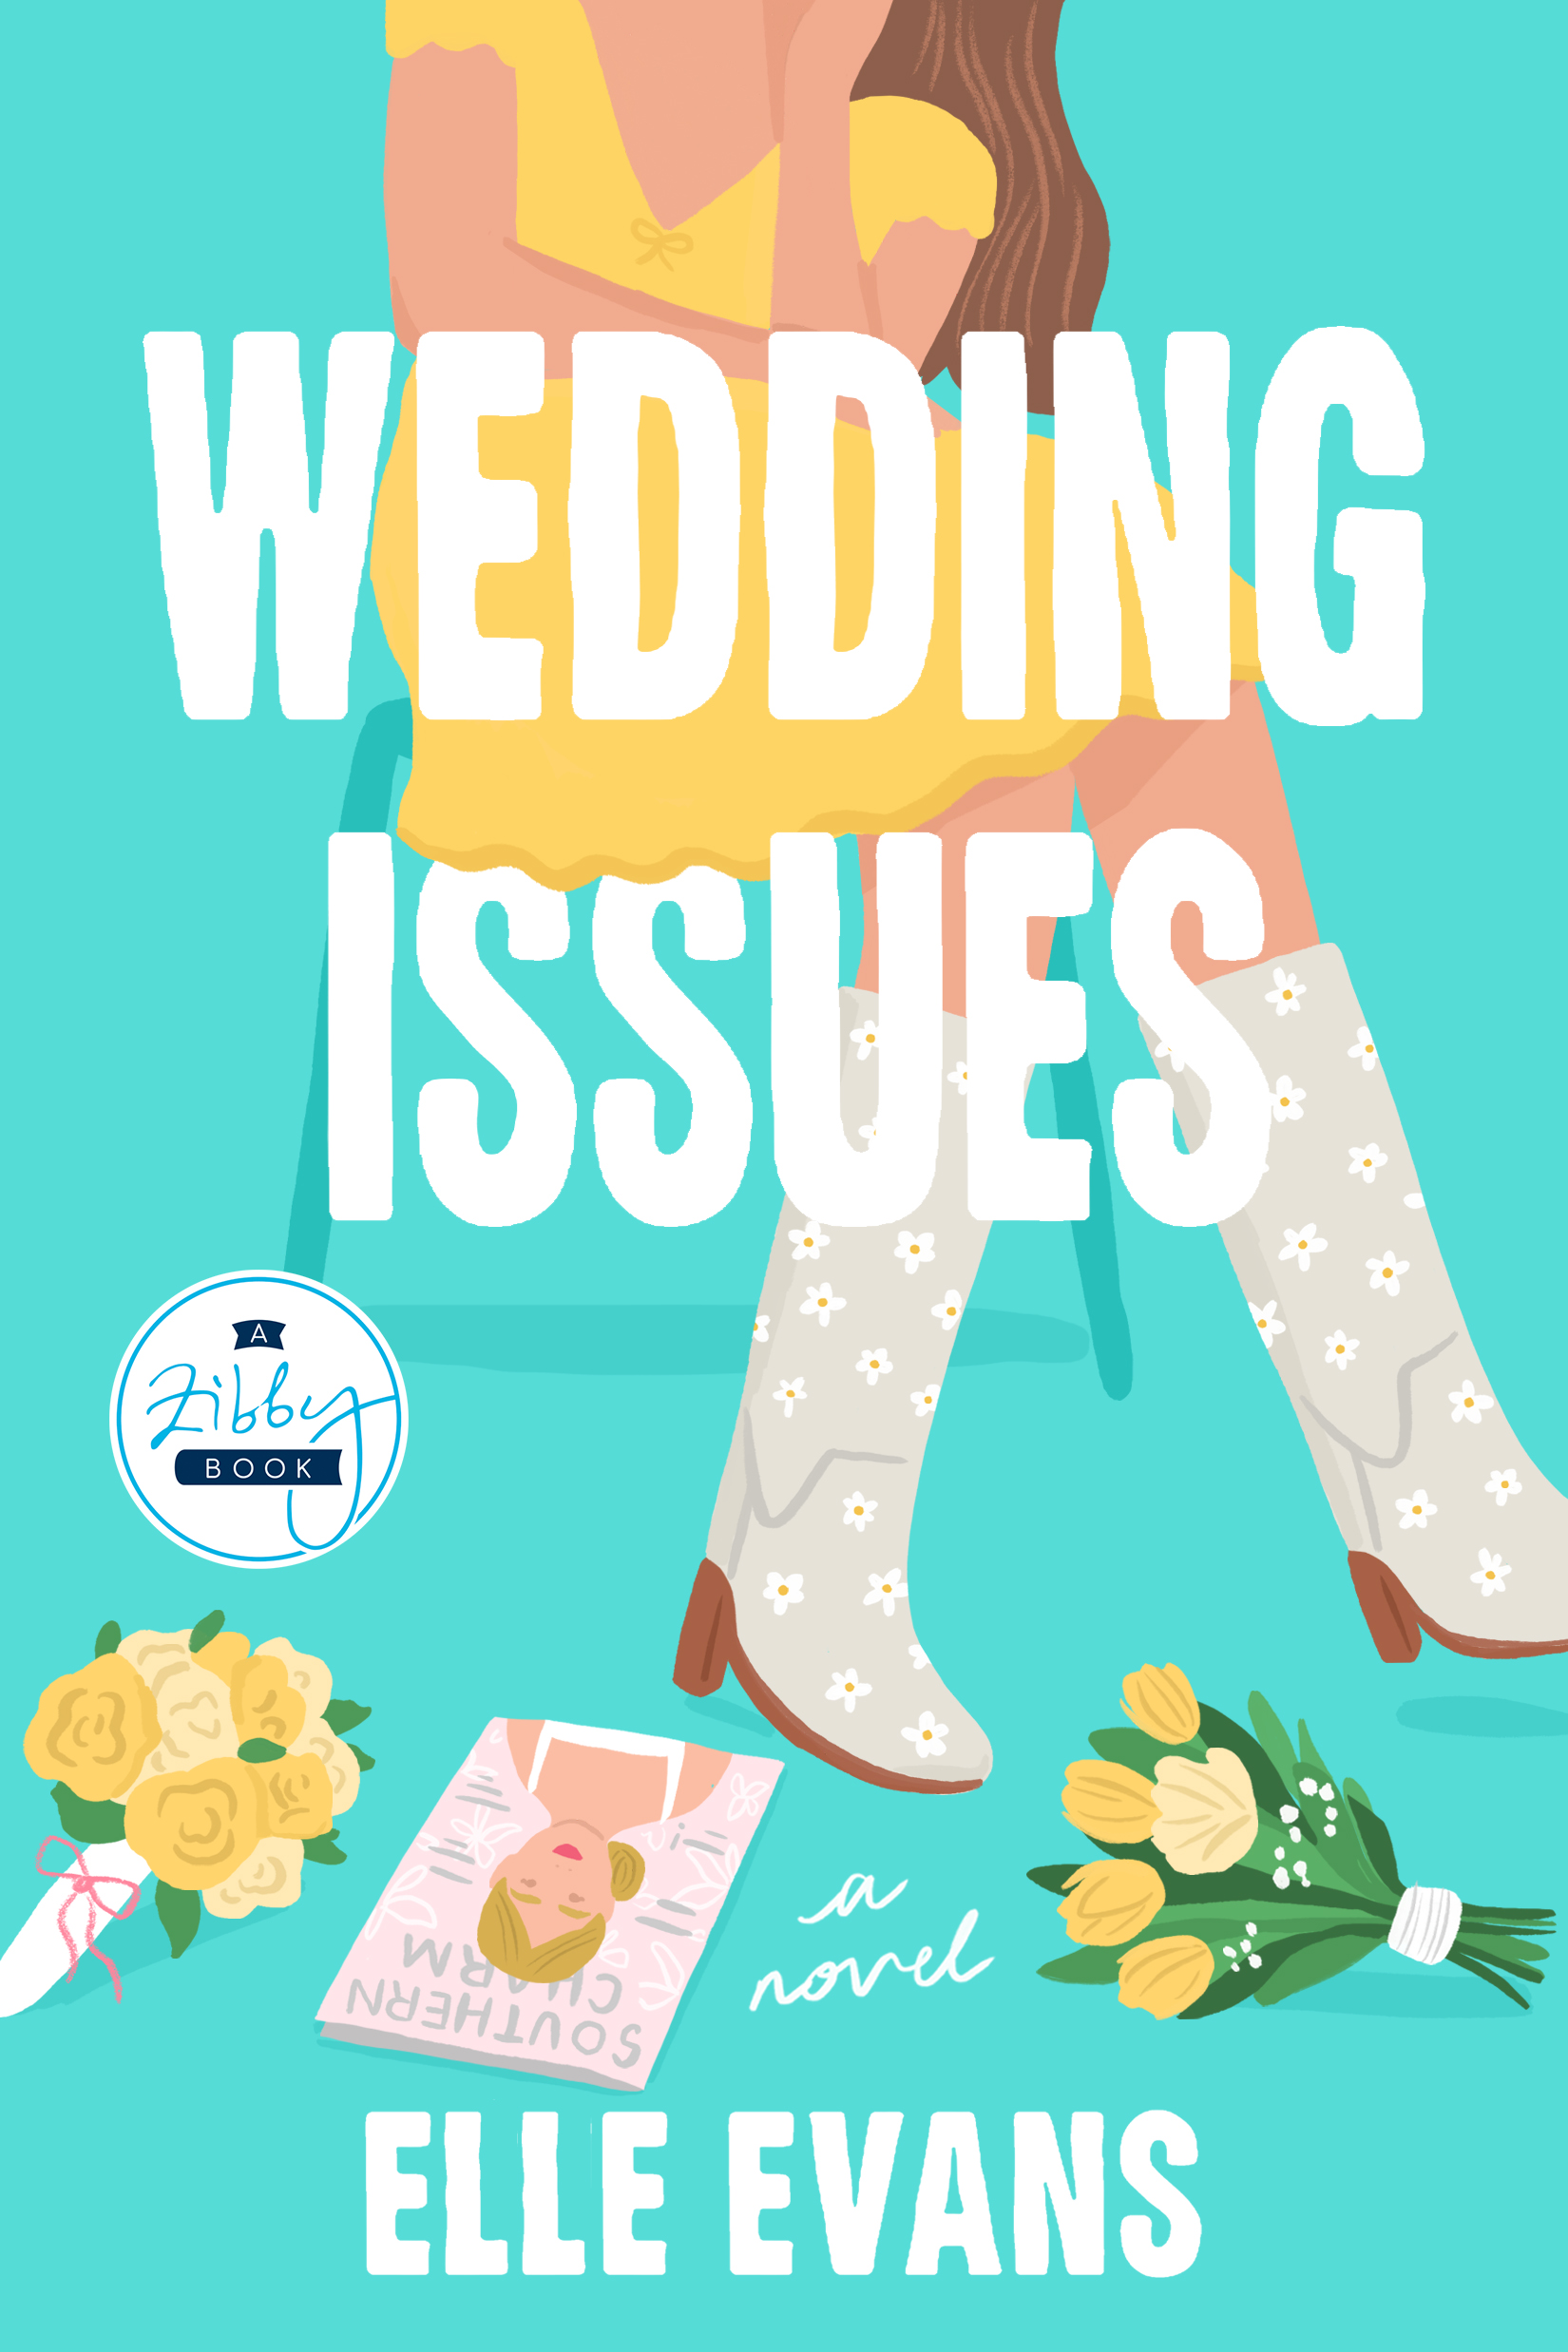 One of our recommended books is Wedding Issues by Elle Evans.